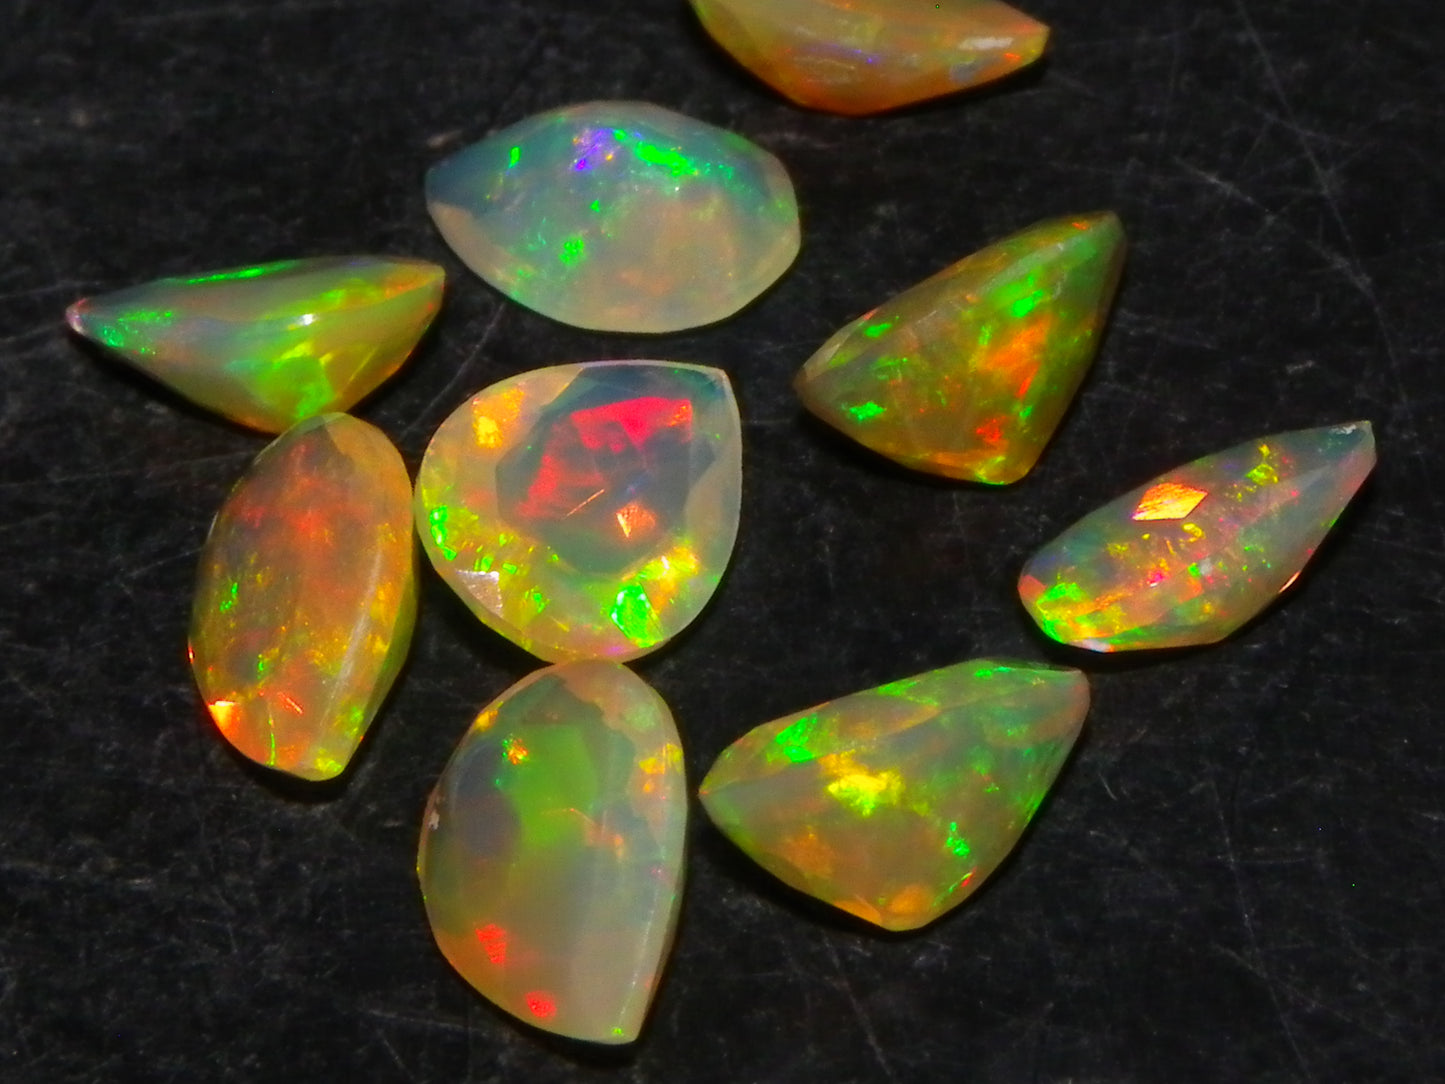 9 Nice Quality Welo Opal Faceted Stones 6.6cts Multicolour Fires Ring Stones